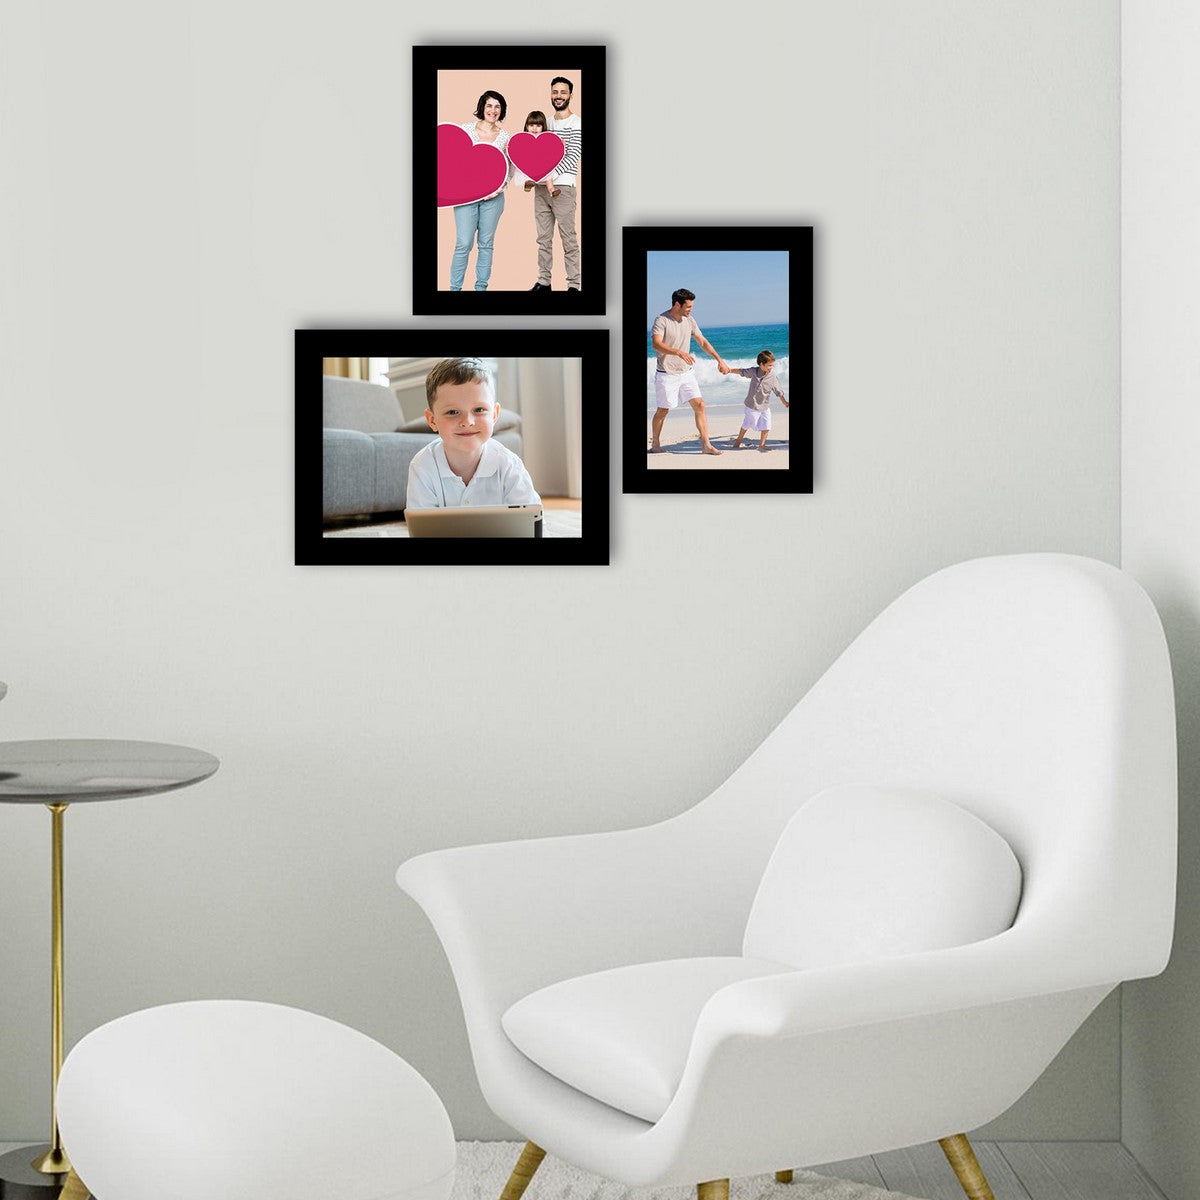 Memory Wall Collage Photo Frame - Set of 3 Photo Frames for 2 Photos of 5"x7" and 1 Photo of 6"x8" 2